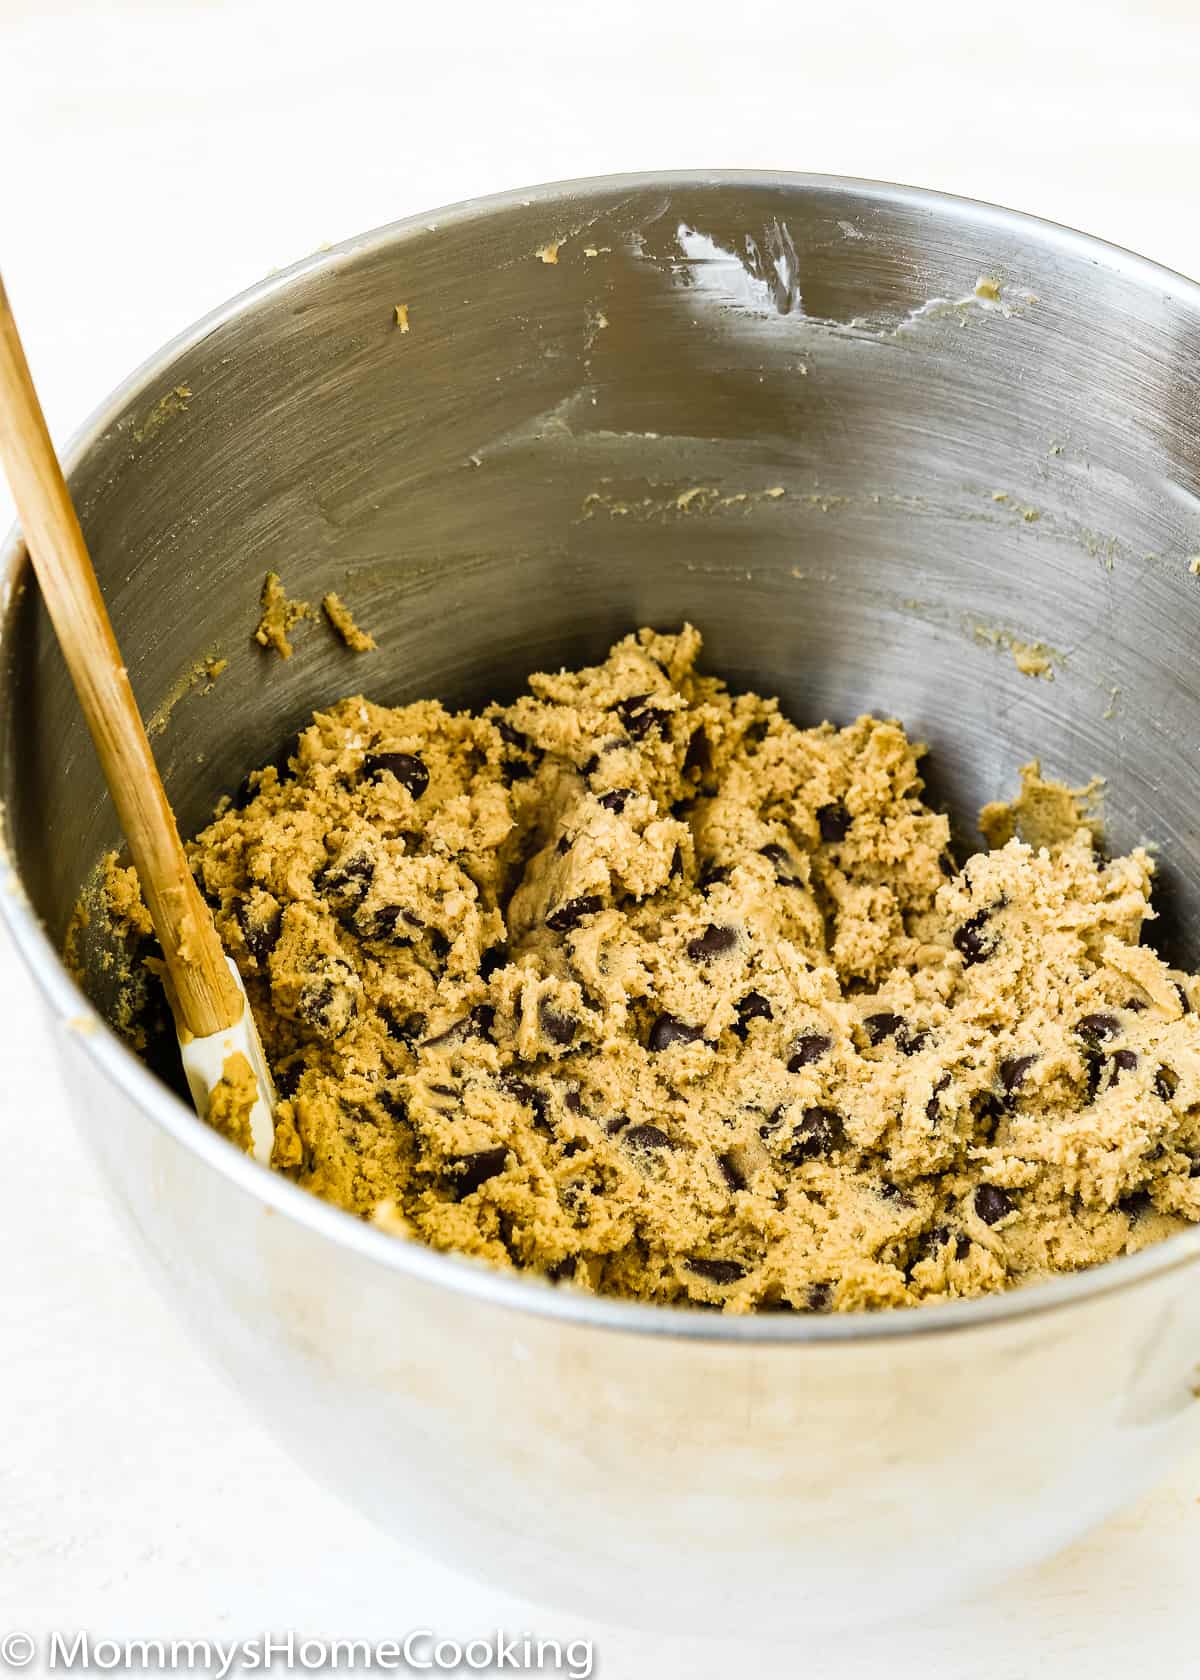 Eggless chocolate chip cookie batter in a mixing bowl.